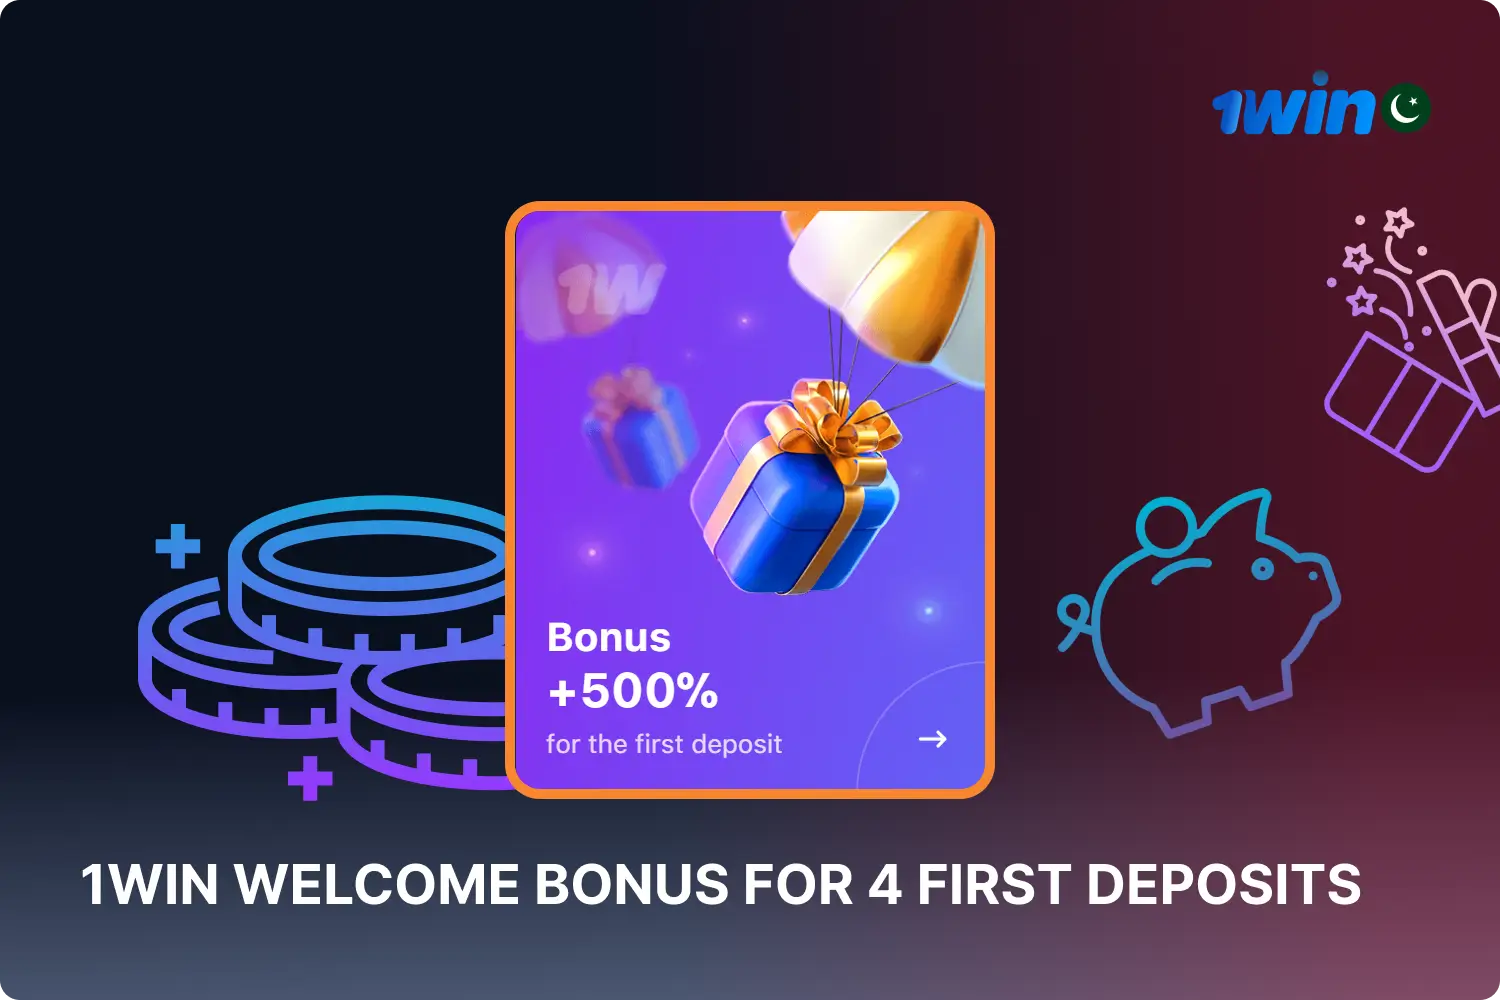 Players at 1win Casino can receive welcome bonuses for making their first four deposits